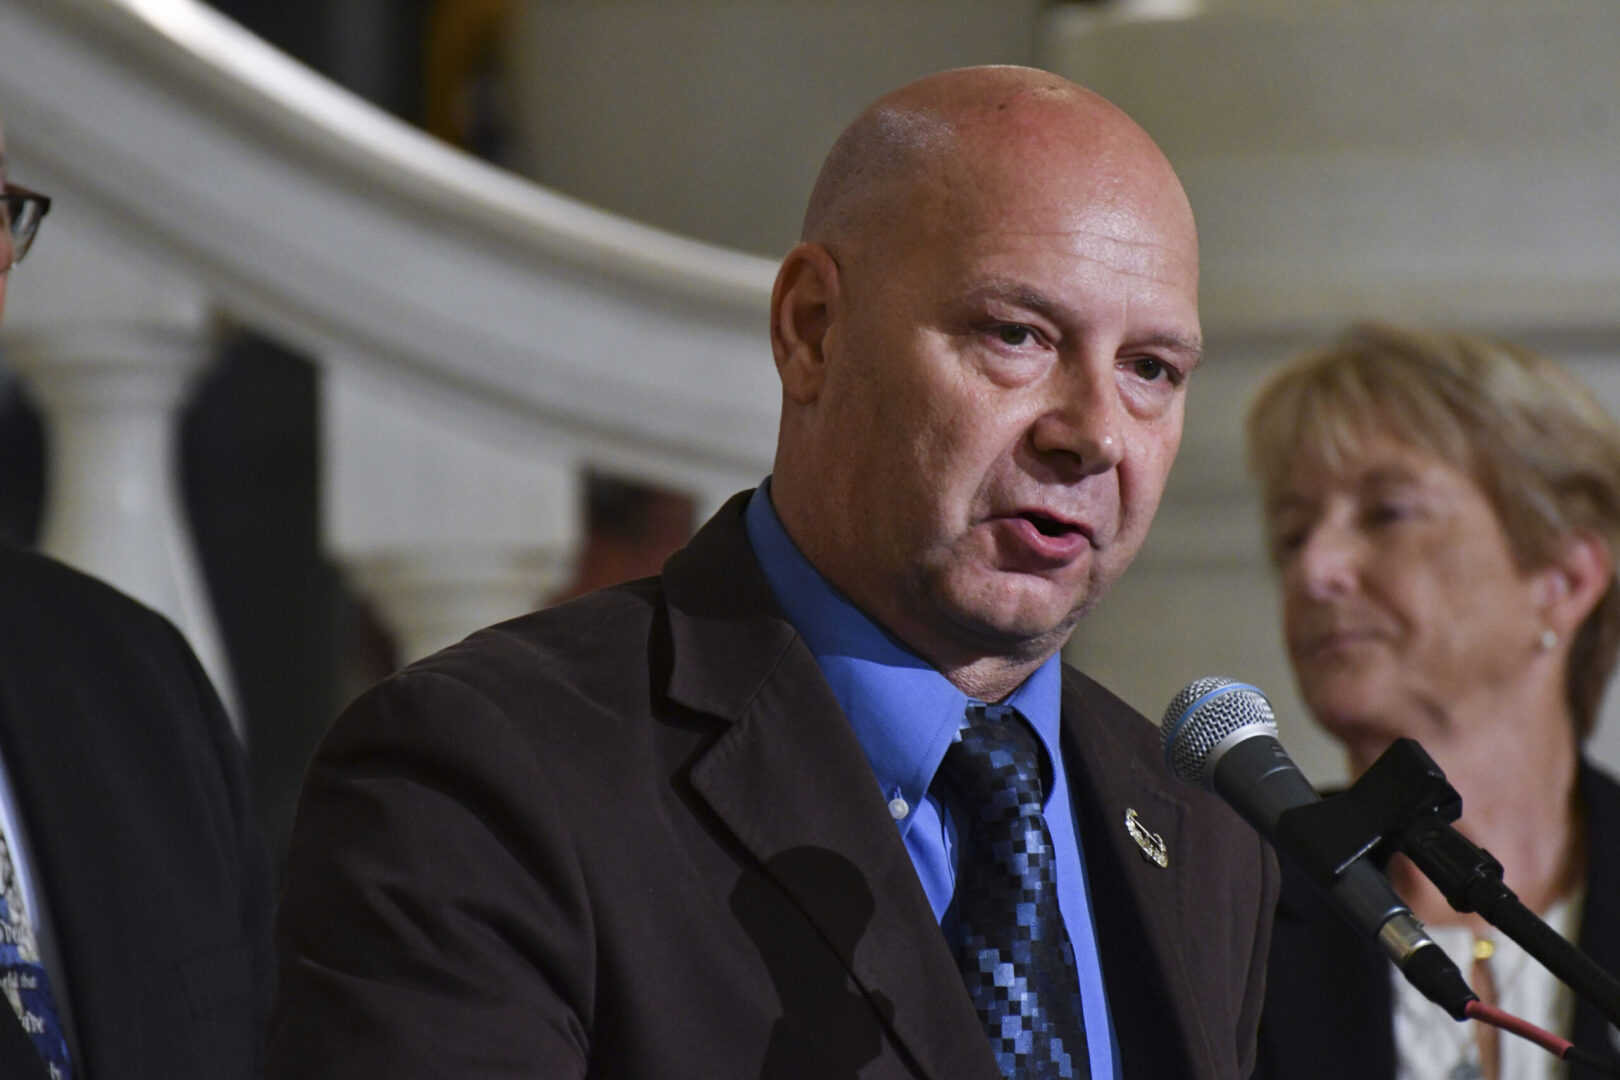 FILE - Doug Mastriano, the Republican gubernatorial nominee in Pennsylvania, speaks at an event at the state Capitol in Harrisburg, Pa., July 1, 2022.